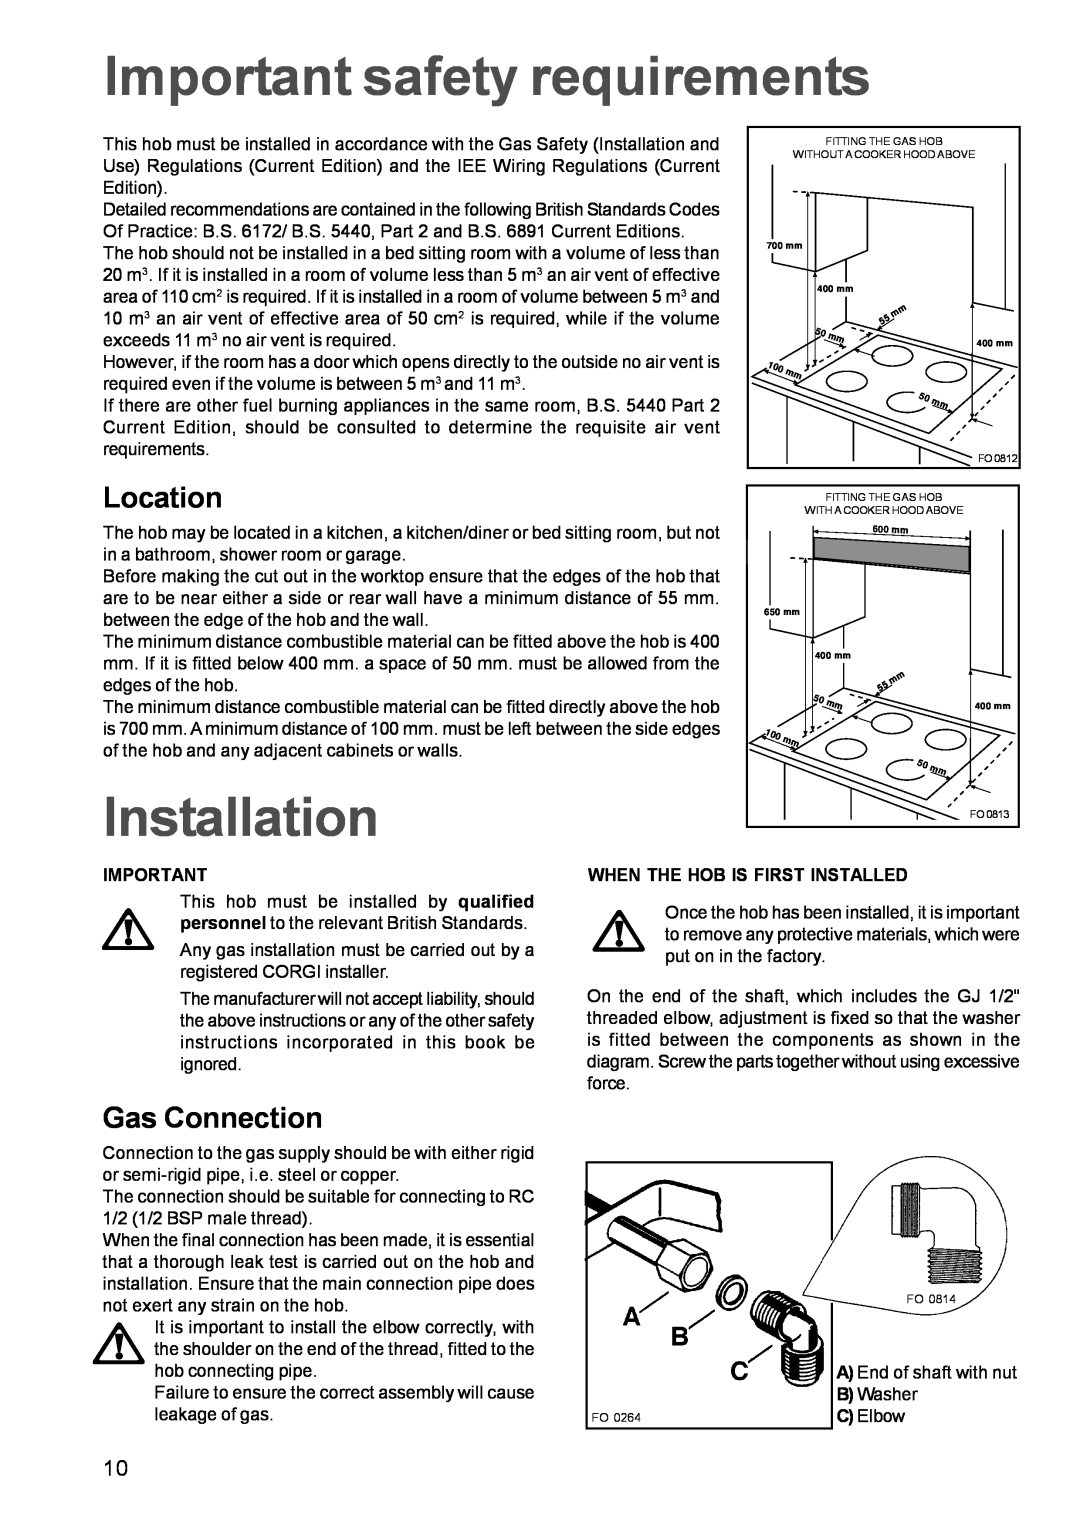 Zanussi ZGG642C manual Important safety requirements, InstallationFO, Location, Gas Connection 